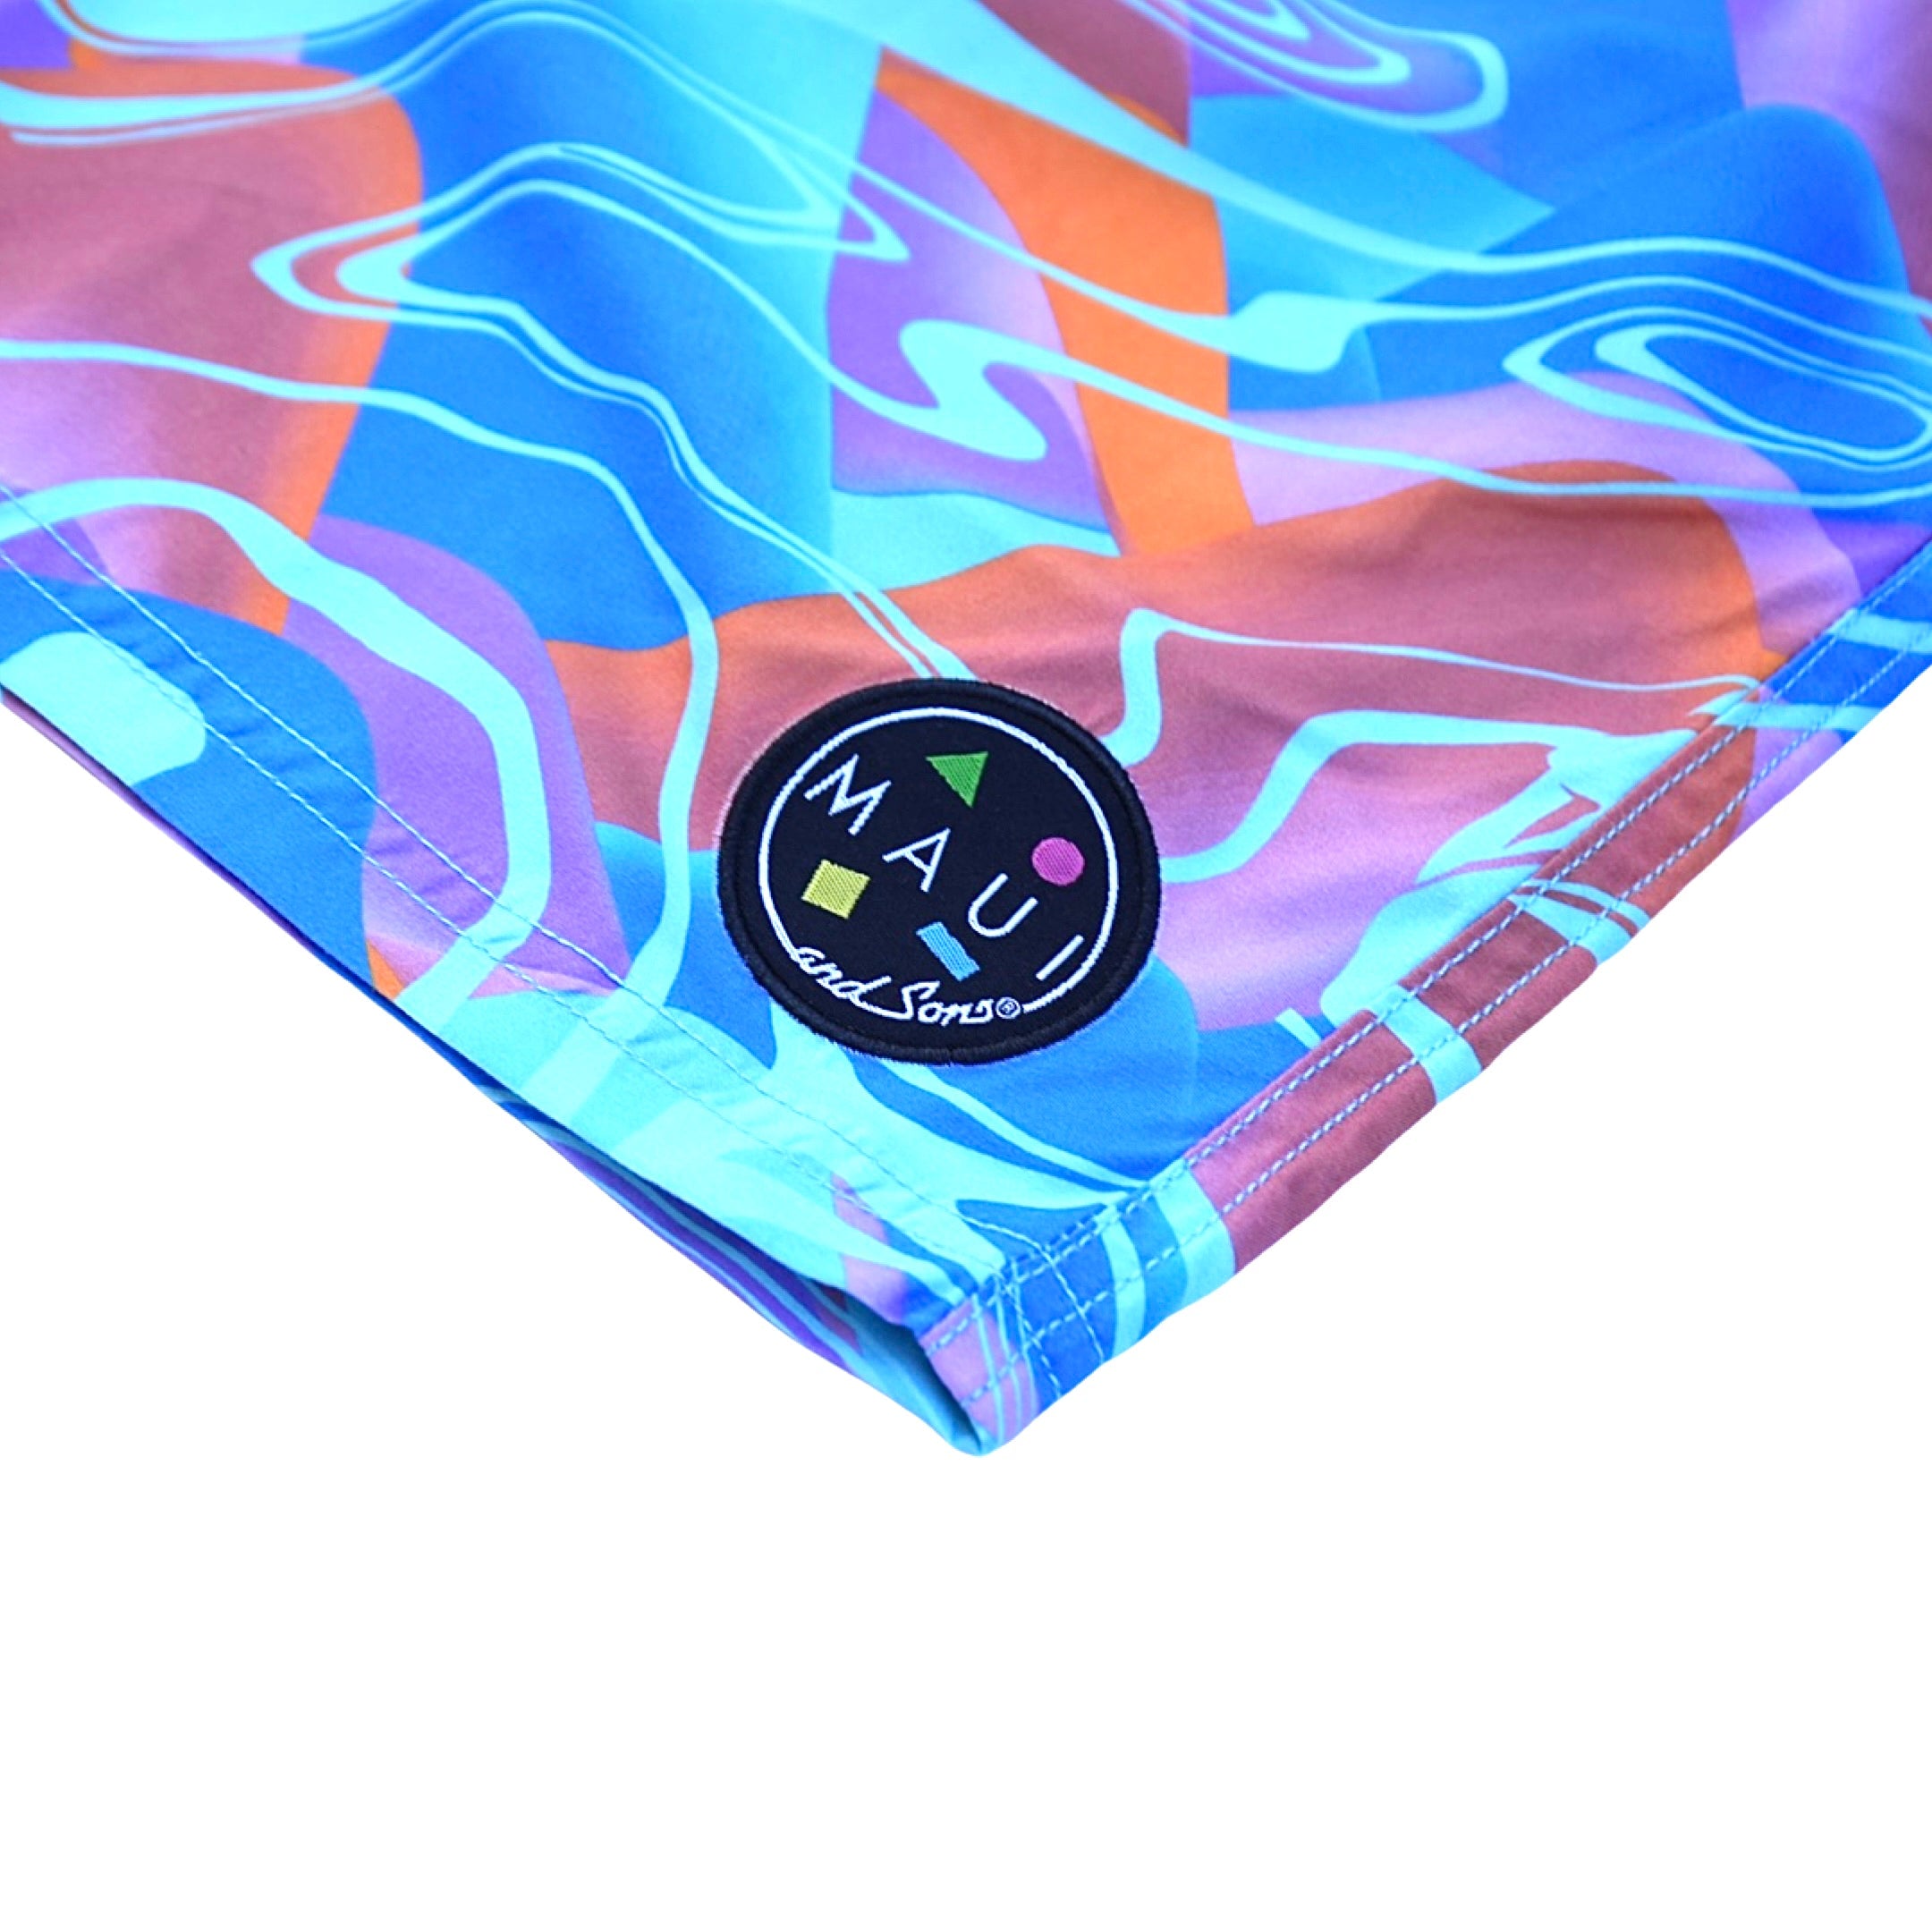 Psychedelic Pool Shorts in Blue